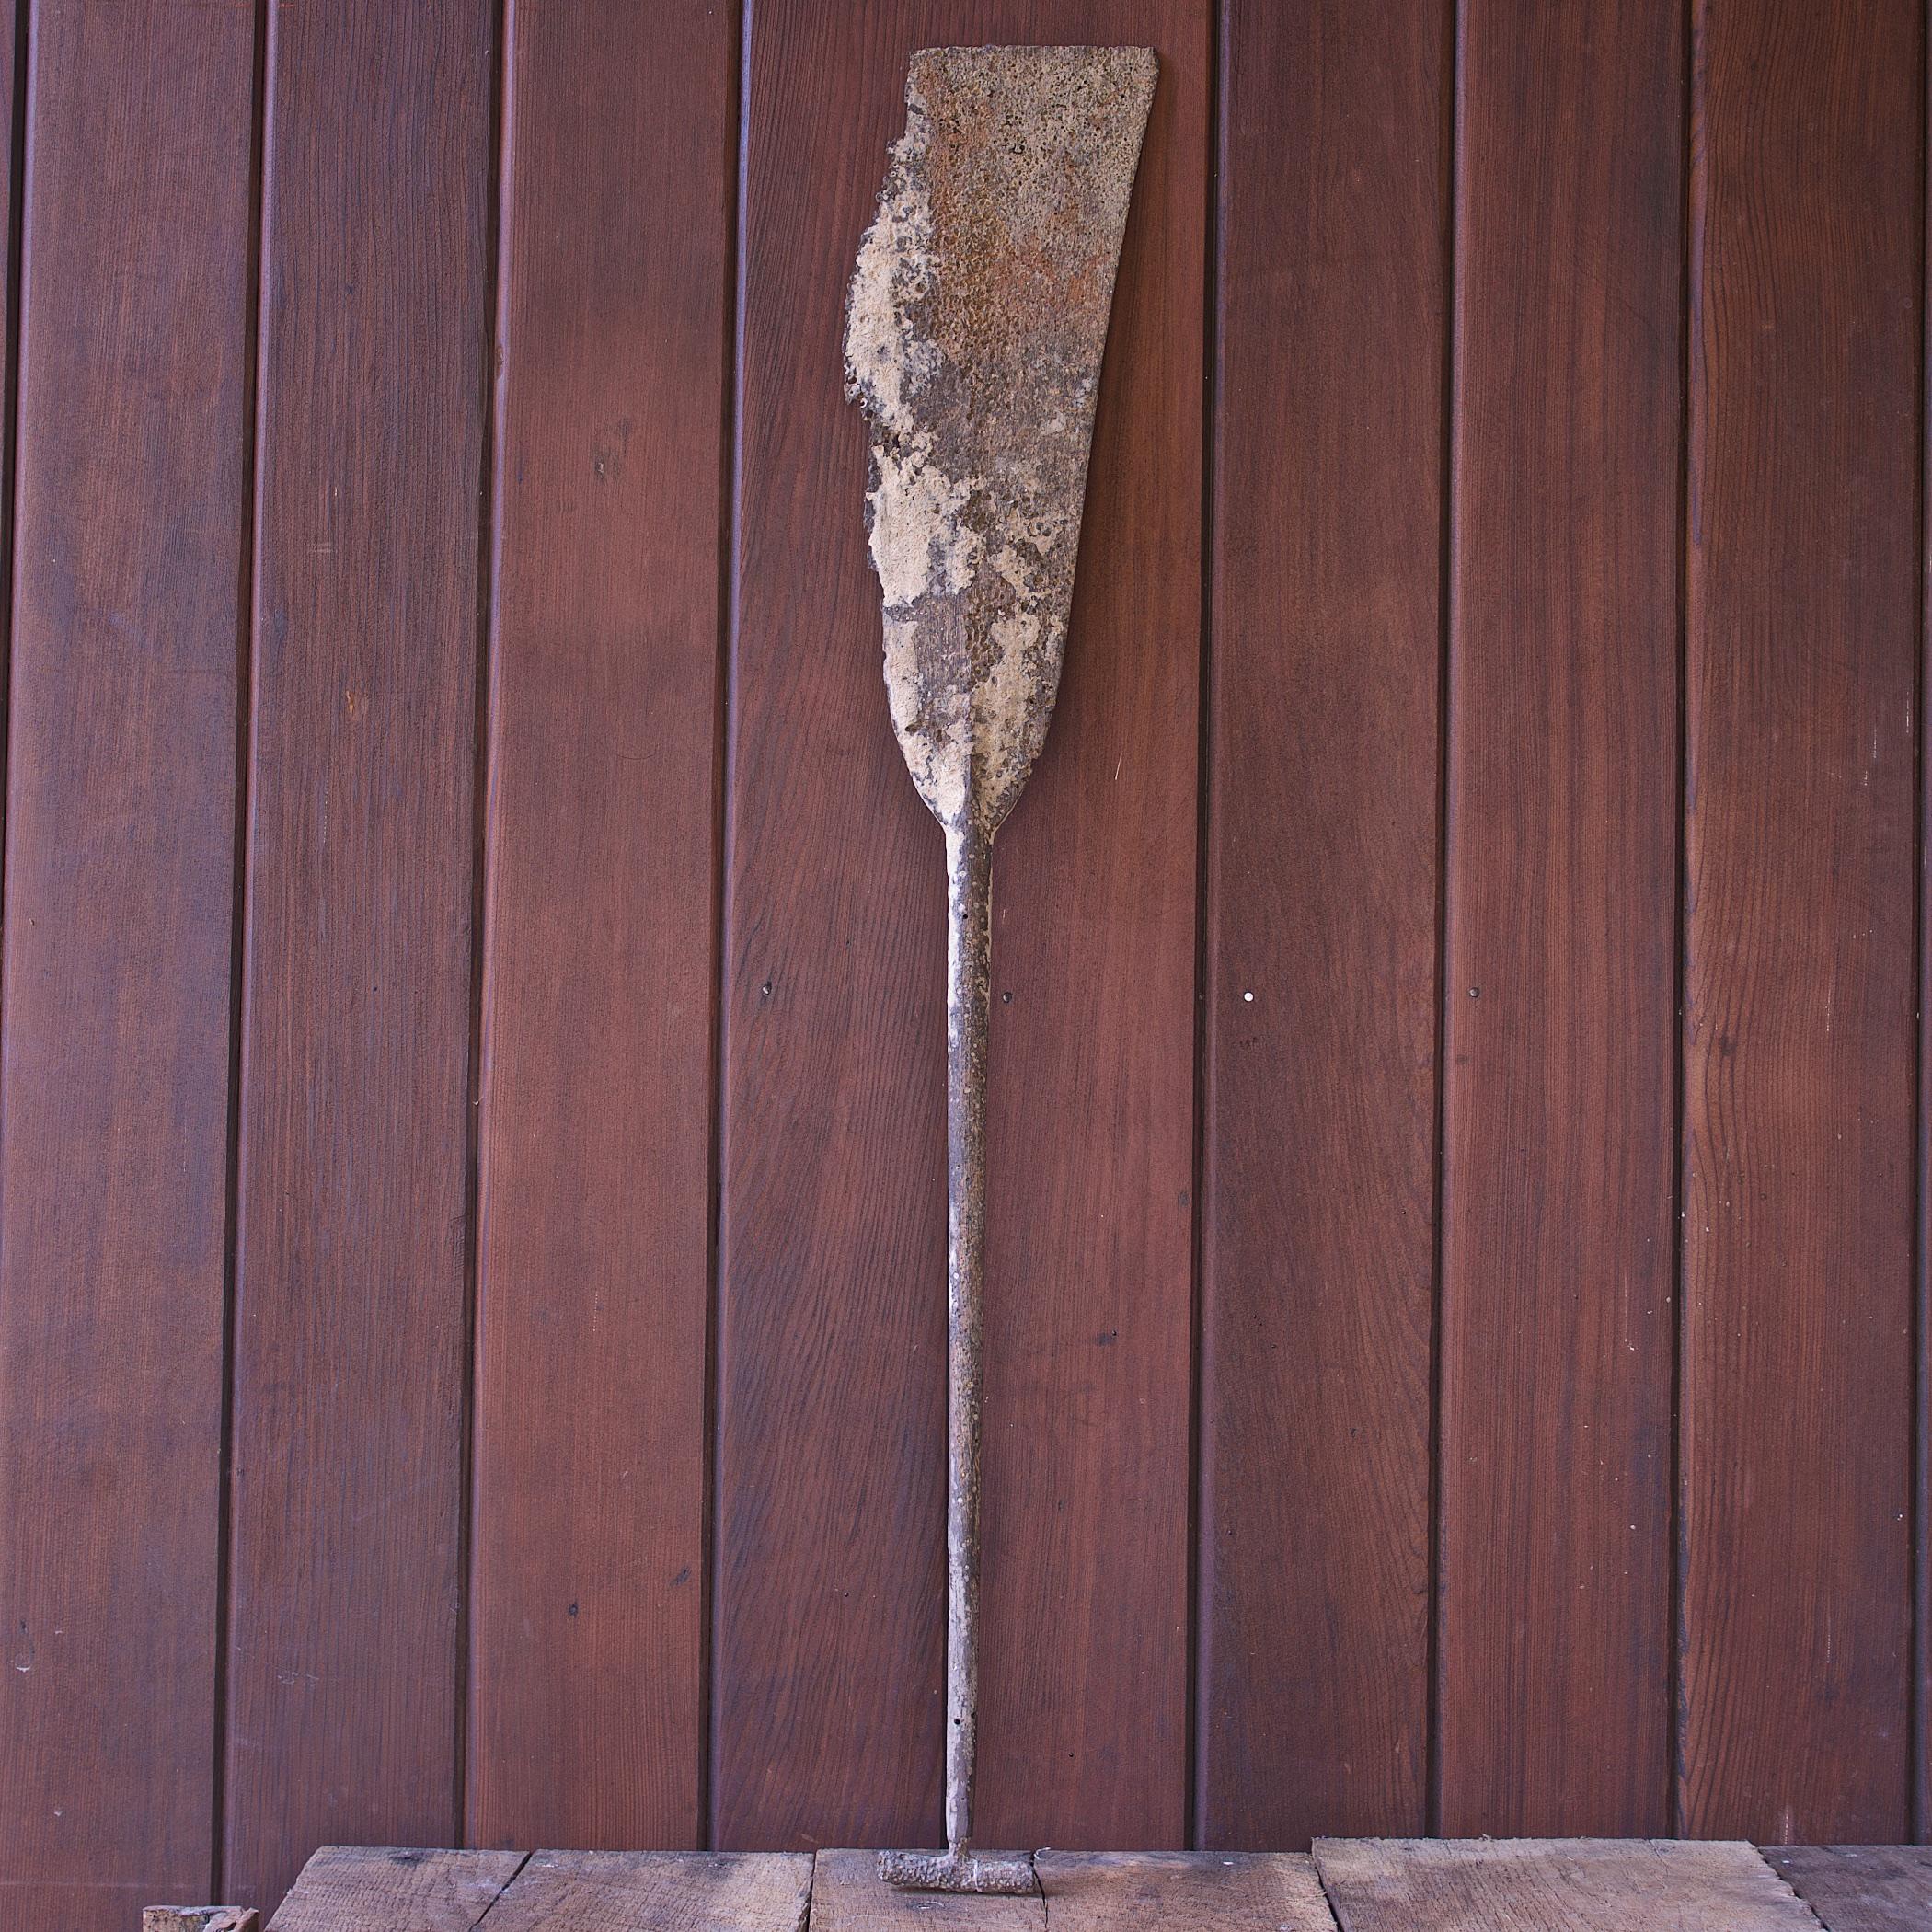 Antique ocean salvage Dayak Ironwood canoe paddle from East Kalimantan, Borneo. Carved from one piece of Ironwood, Kayu Belian, a very hard dense wood. This paddle takes weeks to make by hand. Also called a wedding paddle. It is tradition that the